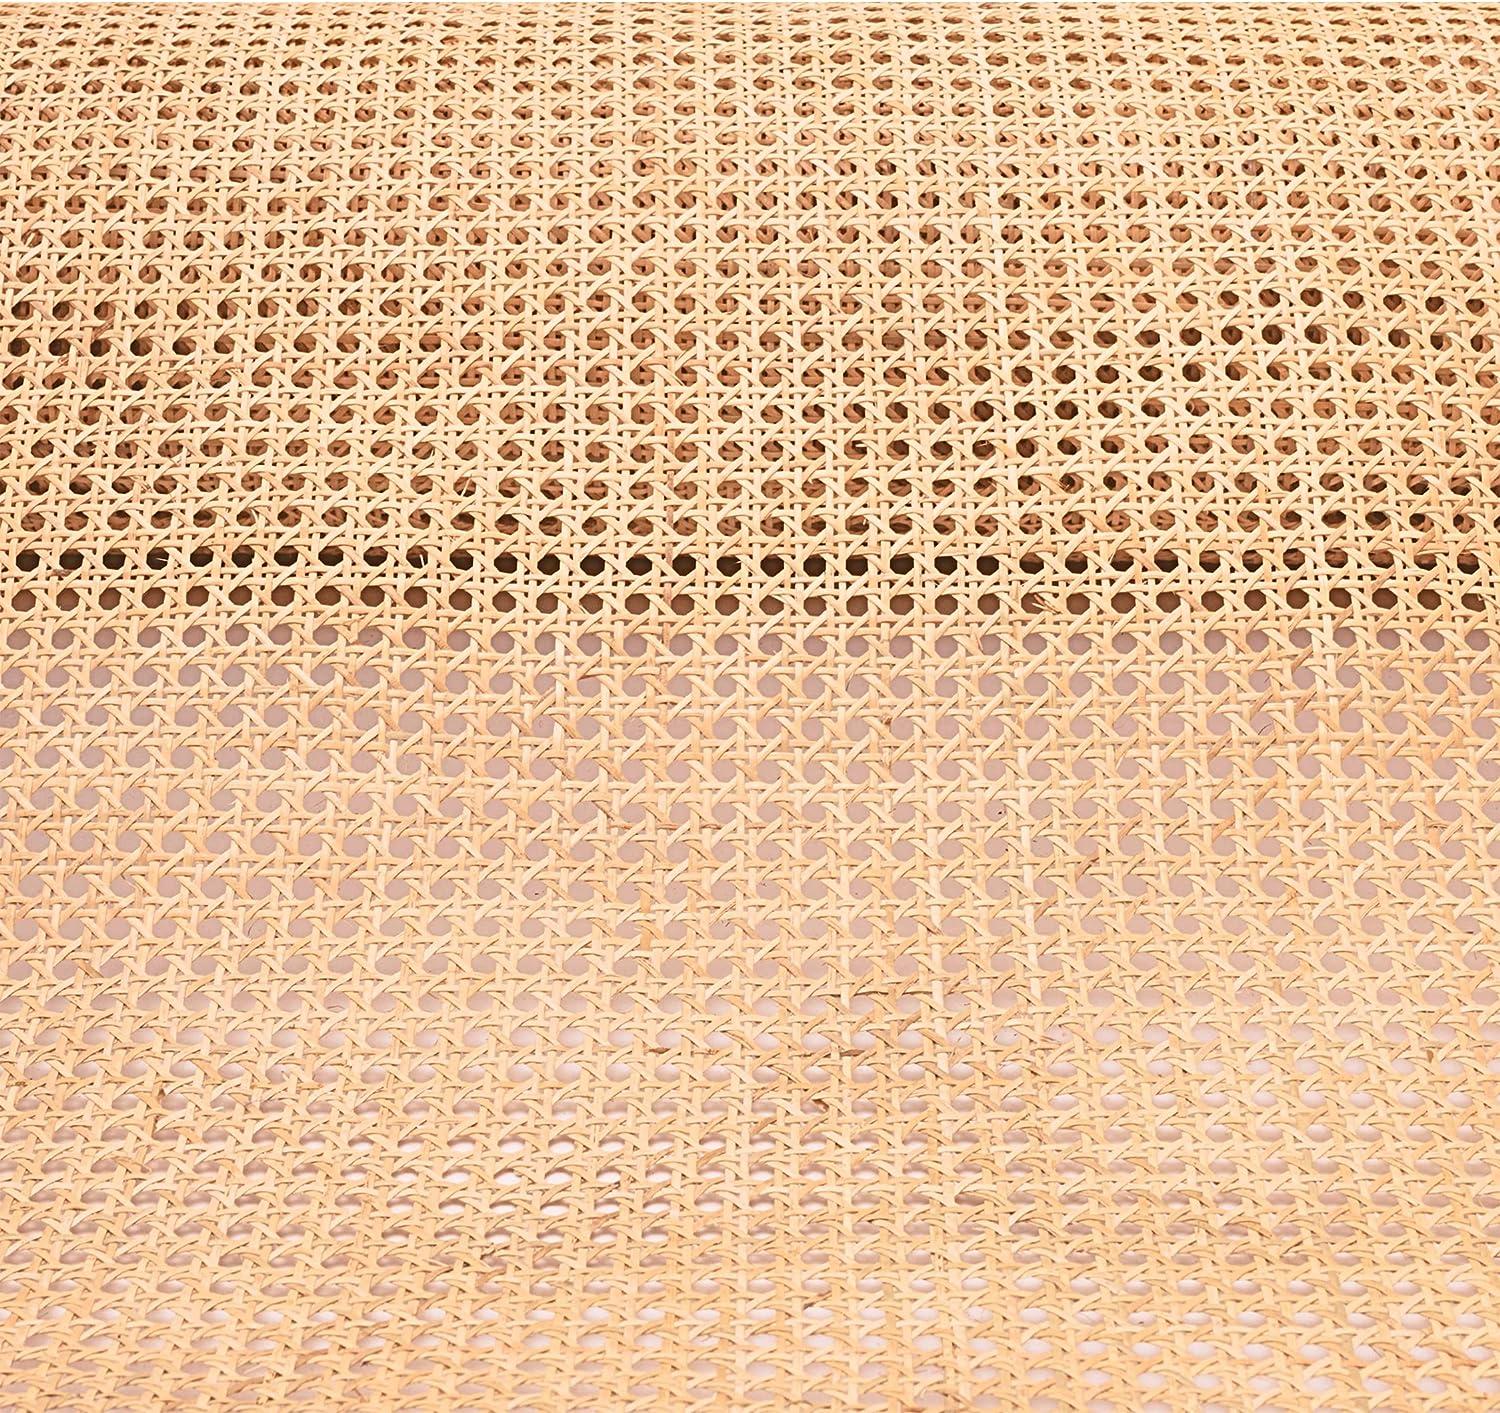 24 Width Rattan Webbing for Caning Projects Natural Pre - Woven Open Mesh  Cane - Cane Webbing Sheet (7 FEET)